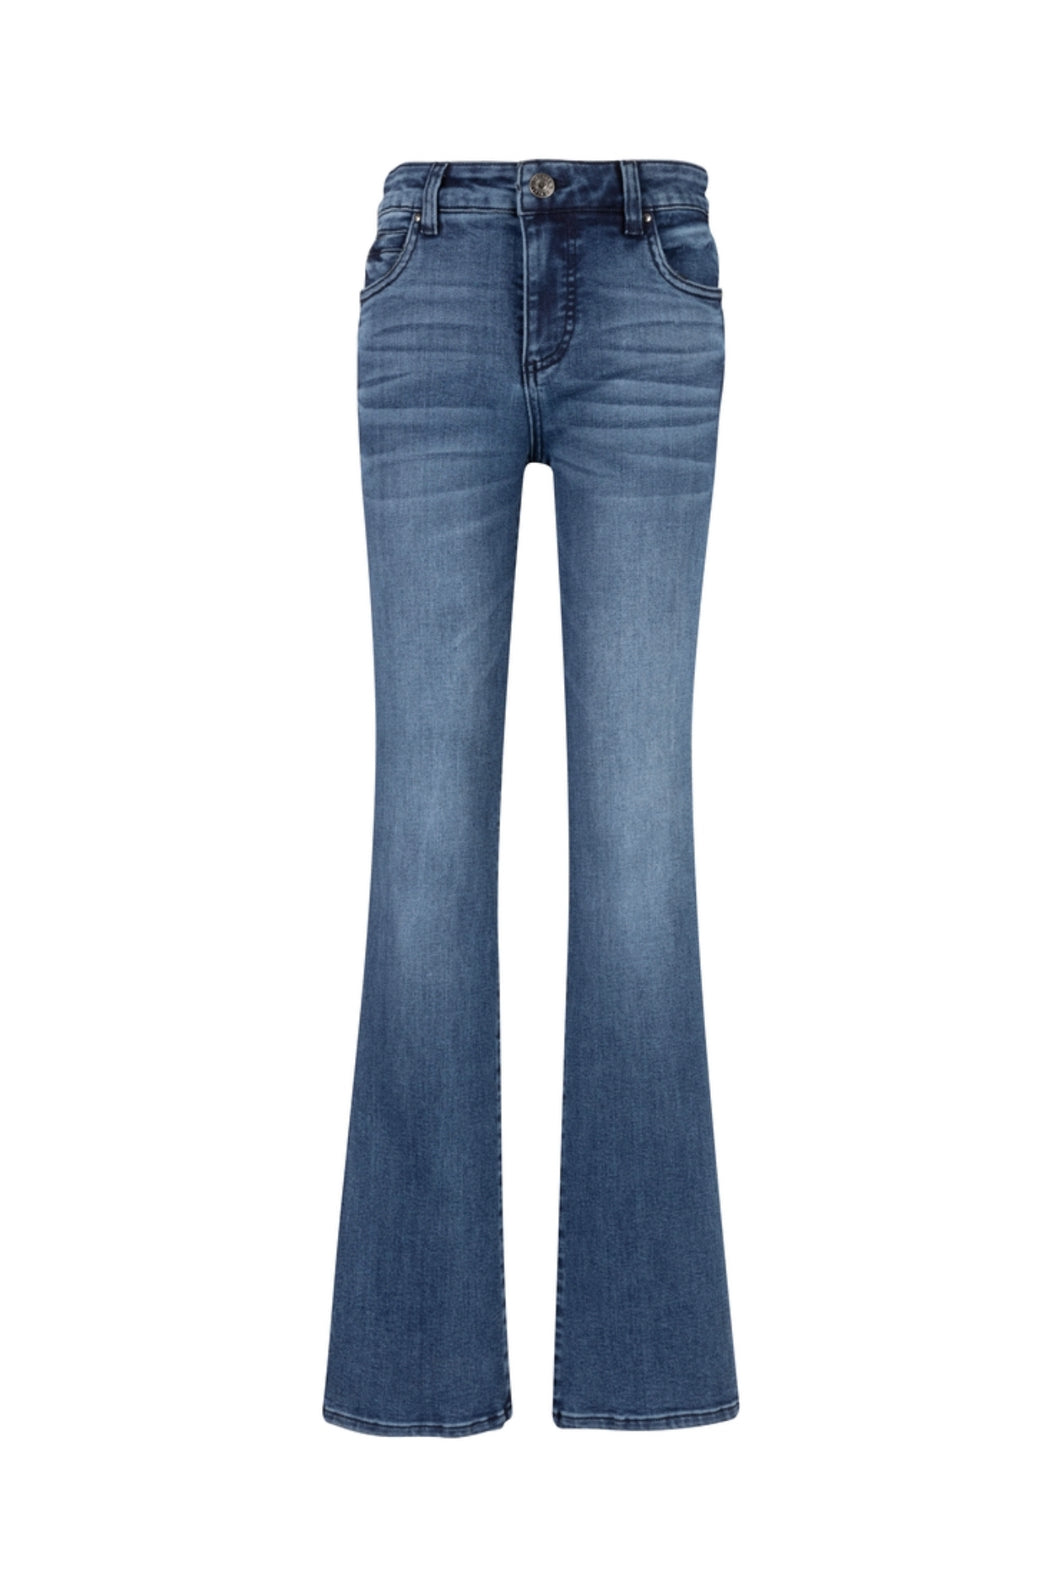 KUT: Natalie High Rise Bootcut Jeans in Ethical